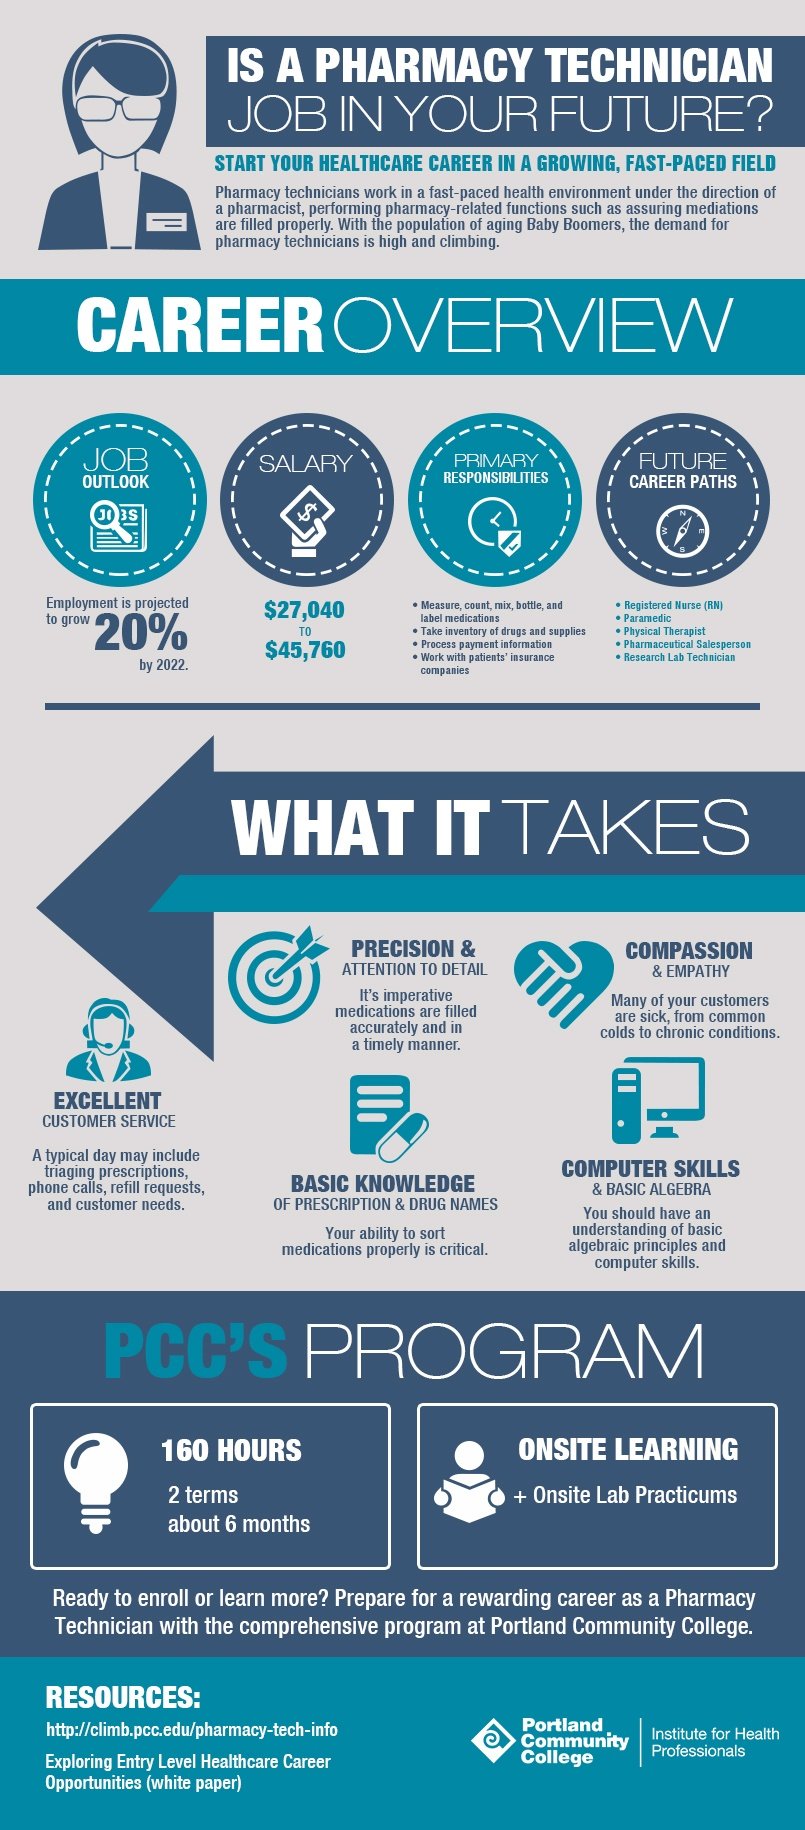 [Infographic] Is a Pharmacy Technician Job in Your Future?